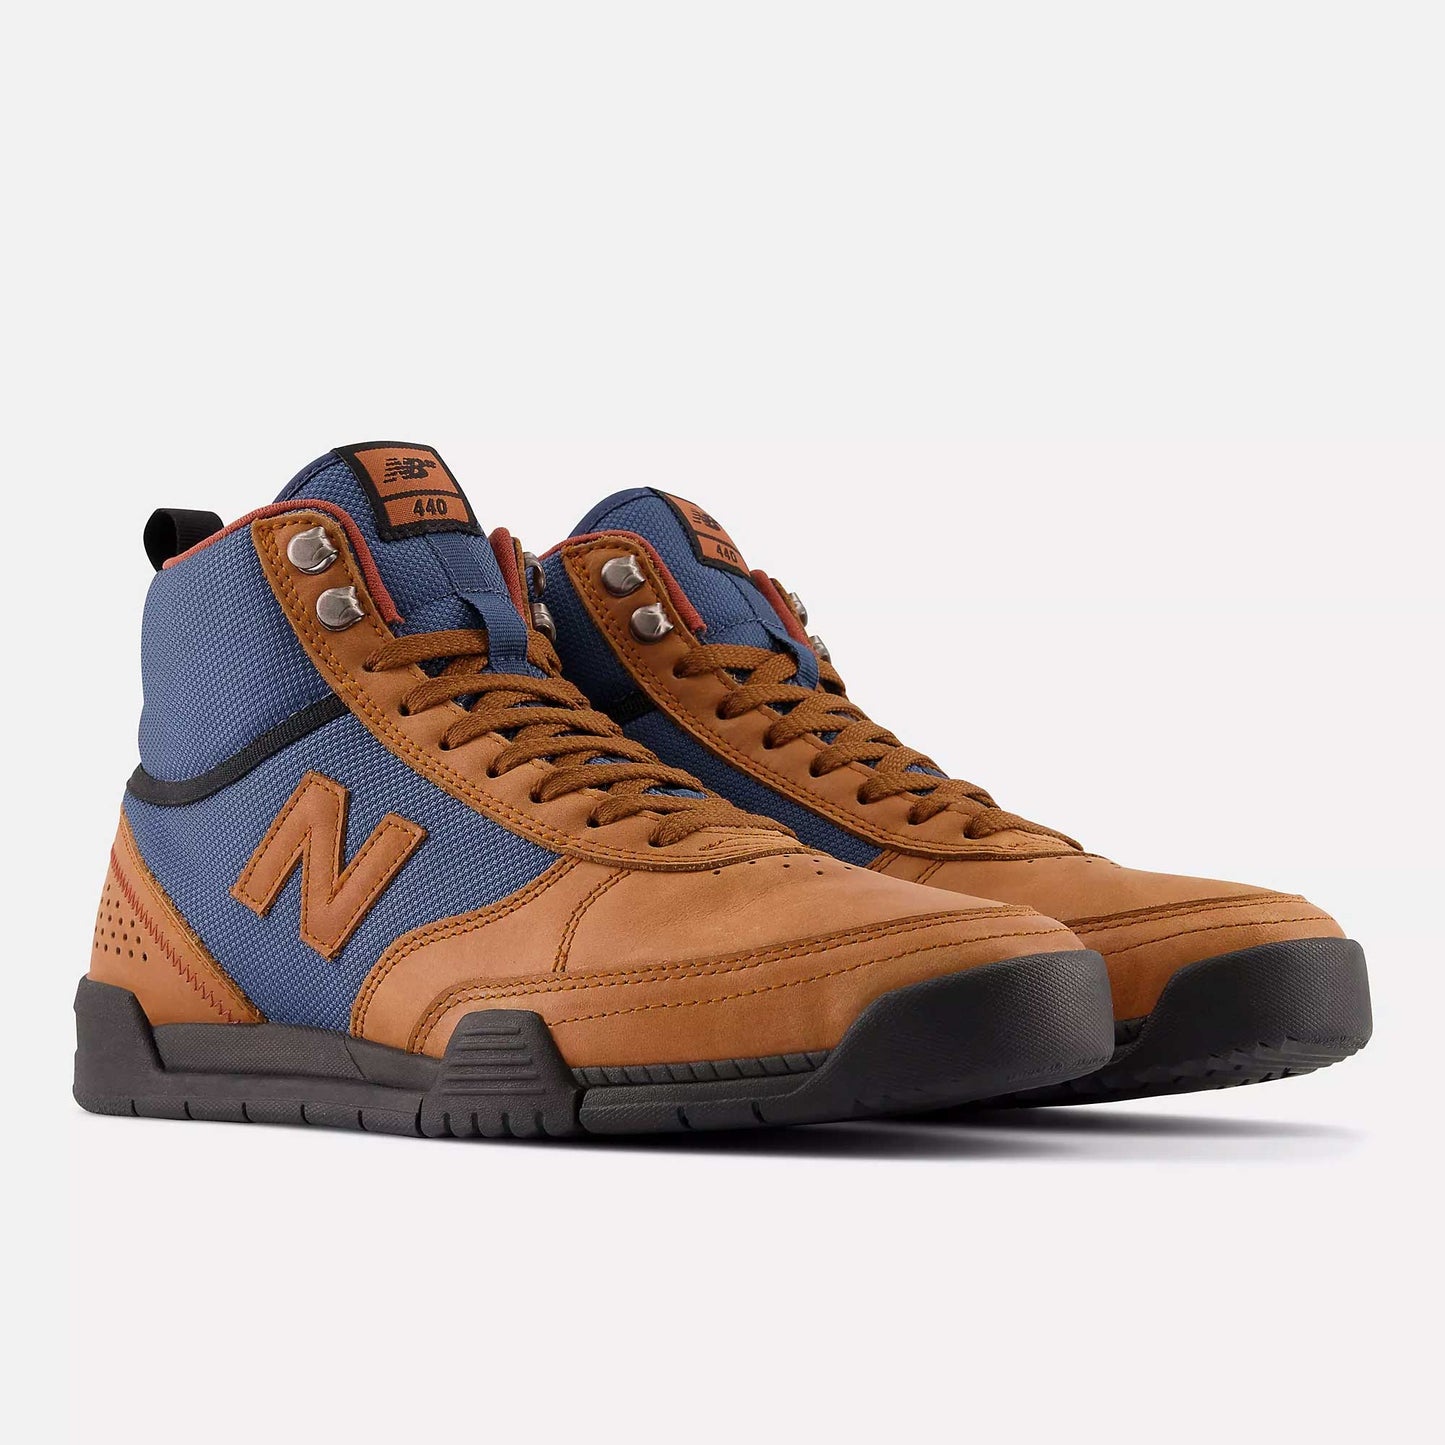 New Balance Numeric 440 Trail, brown with navy - Tiki Room Skateboards - 2